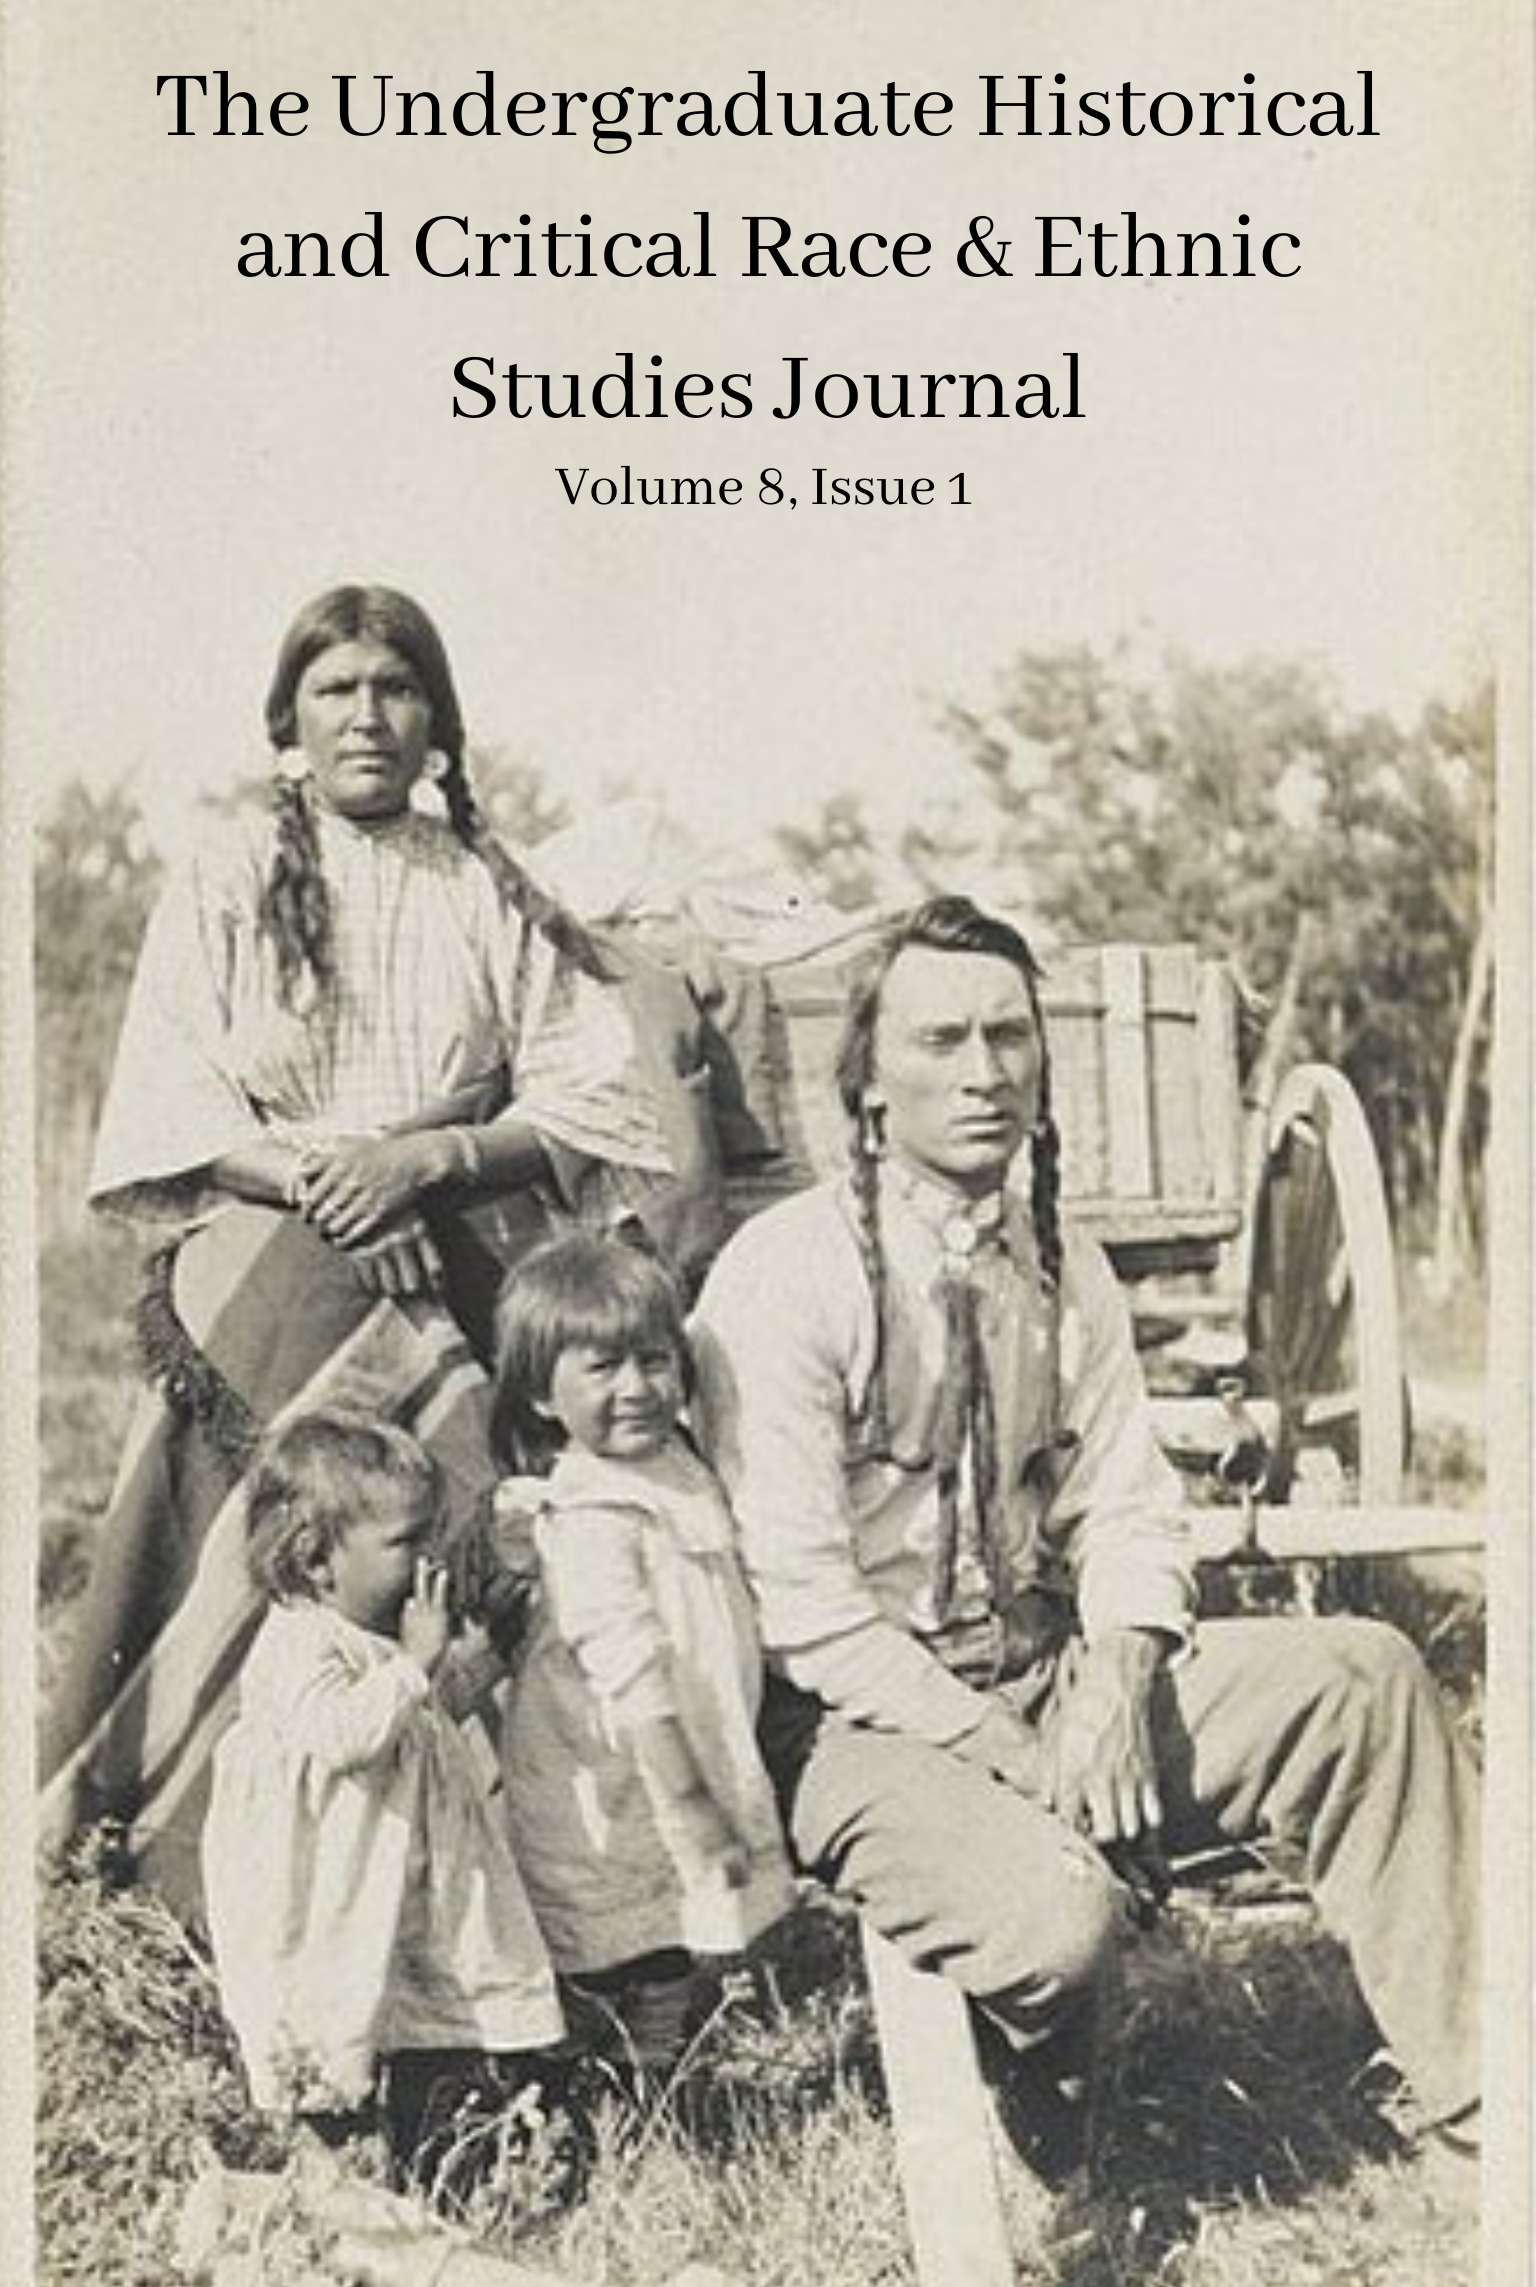 The Undergraduate Historical Journal at UC Merced